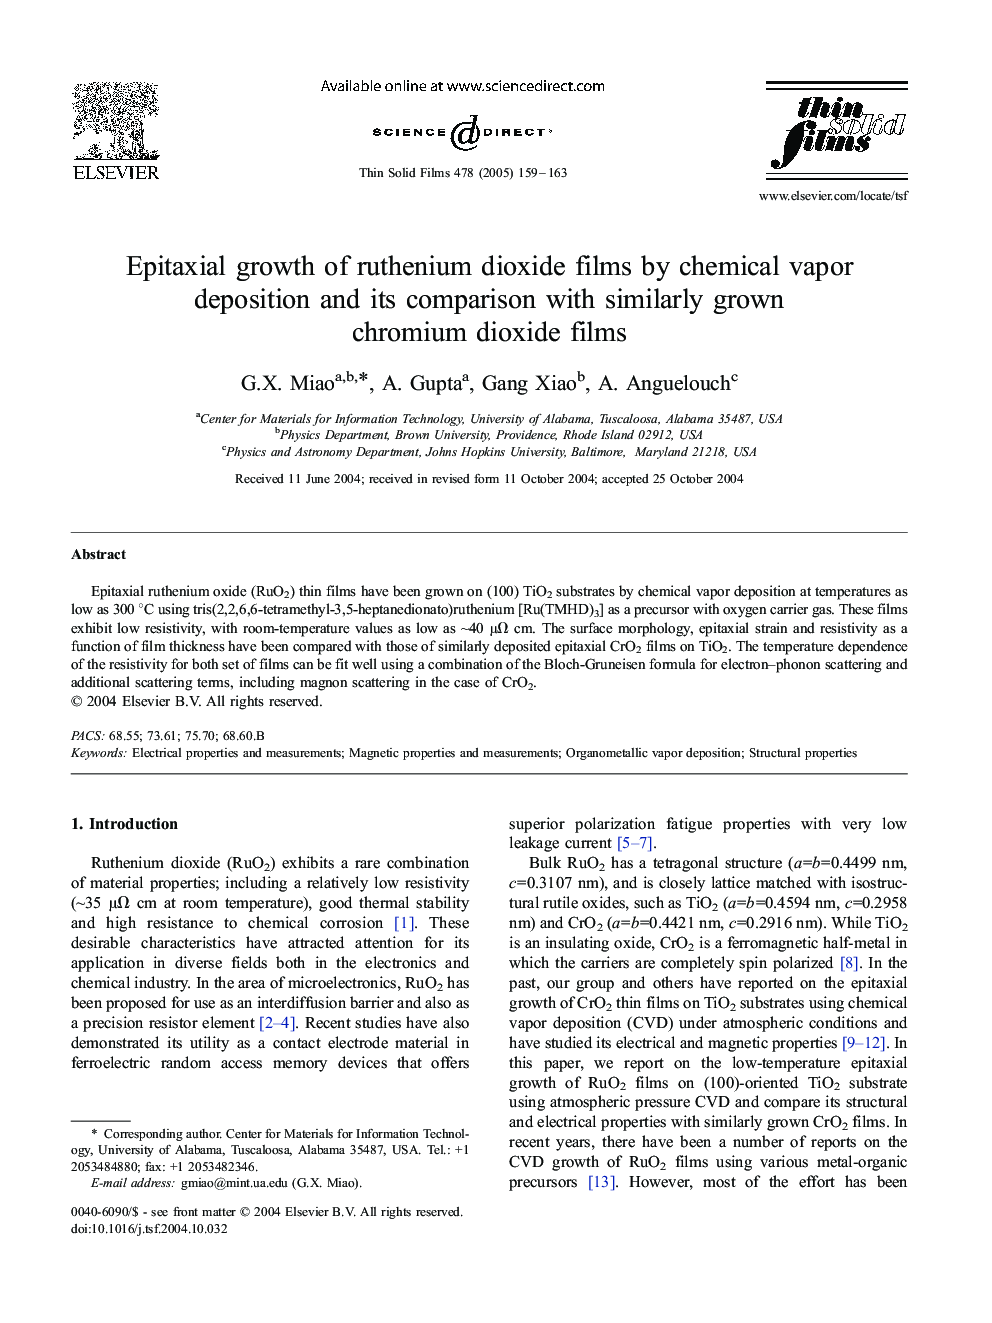 Epitaxial growth of ruthenium dioxide films by chemical vapor deposition and its comparison with similarly grown chromium dioxide films